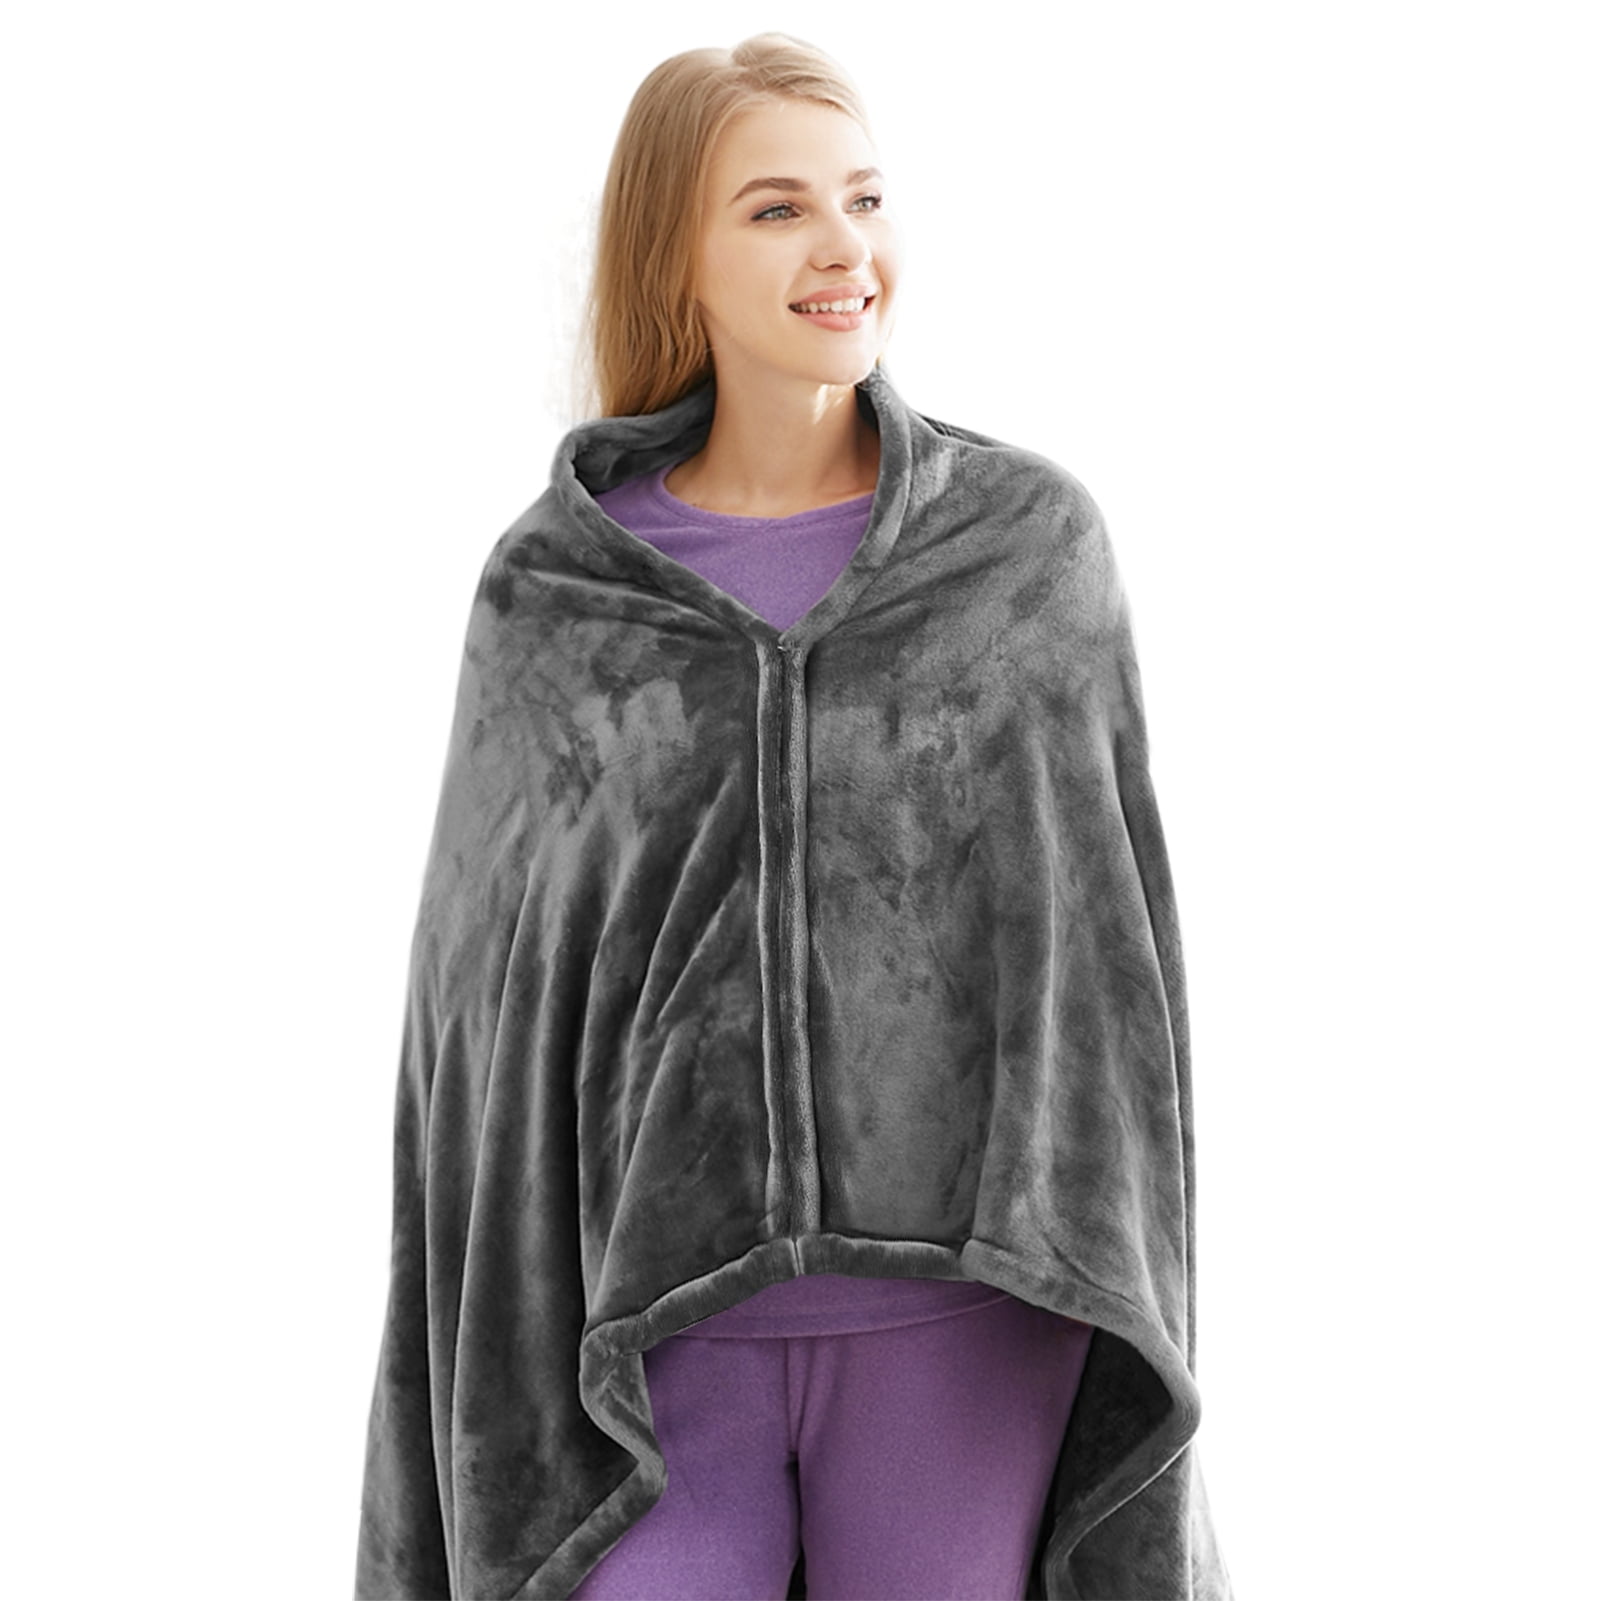 Heating shawlUSB Heated Shawl Electric Shoulder Blanket for Office and Sofa  Use - Walmart.com